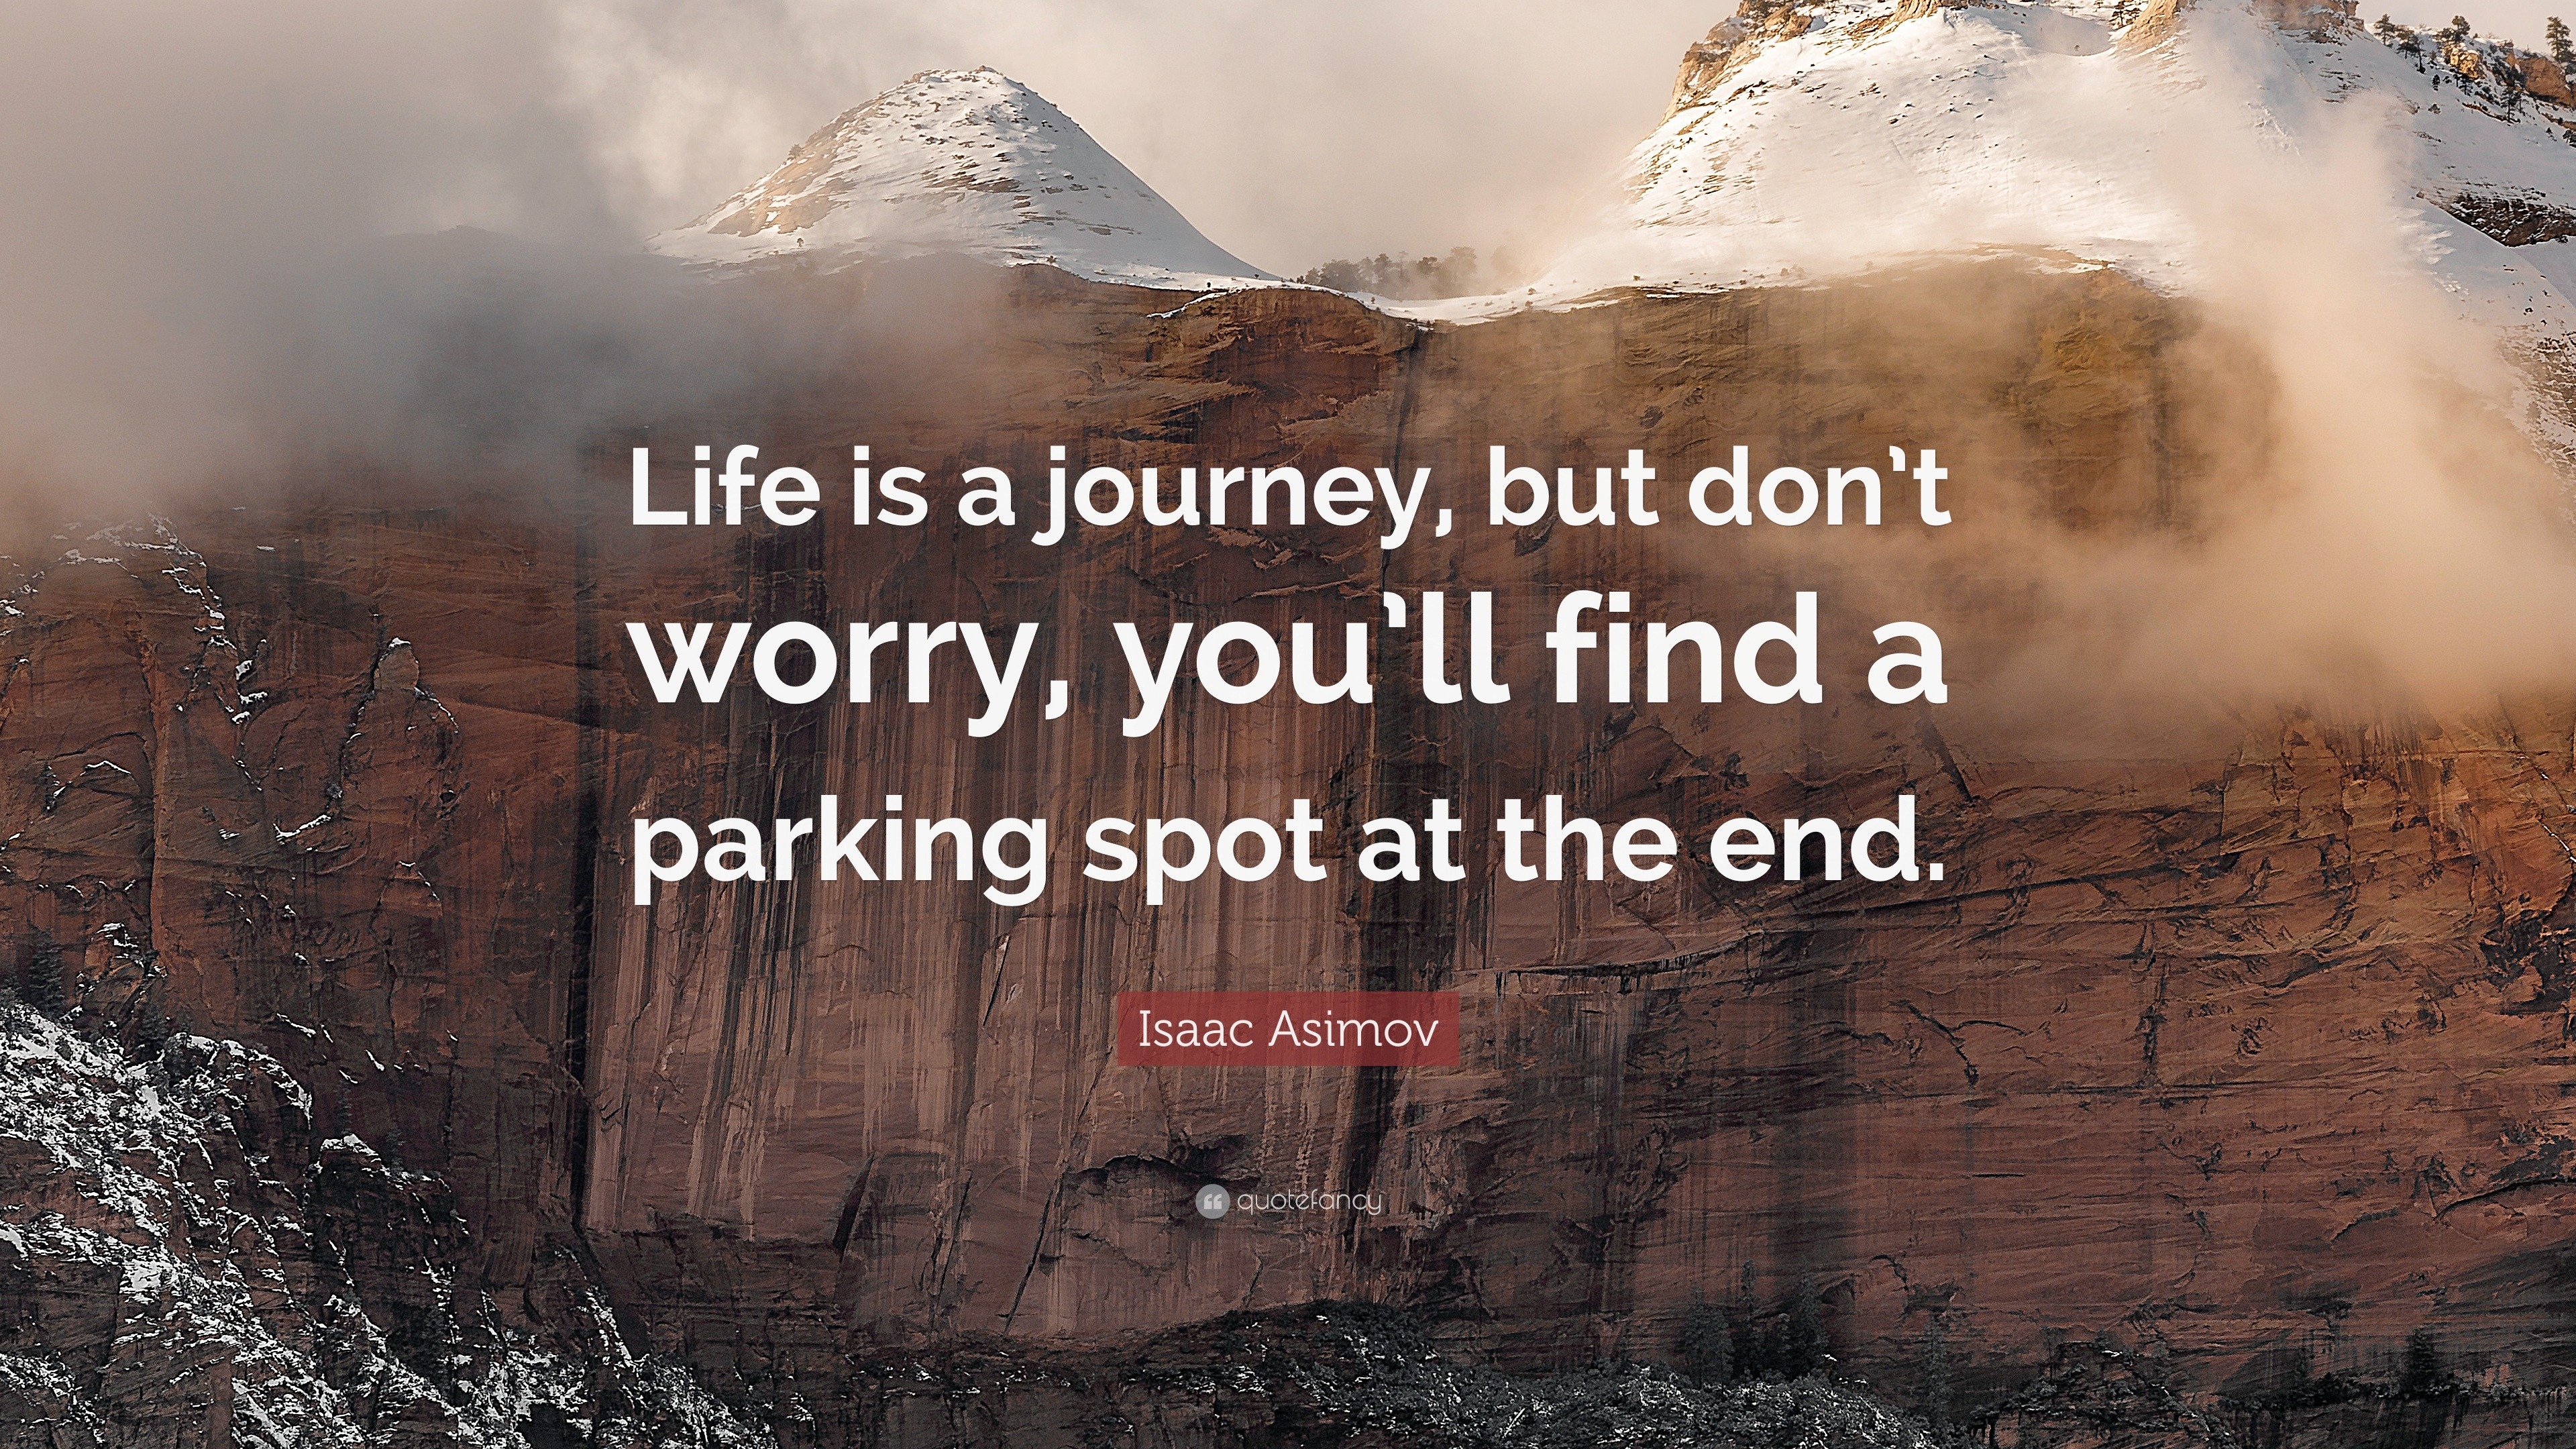 Isaac Asimov Quote “Life is a journey but don t worry